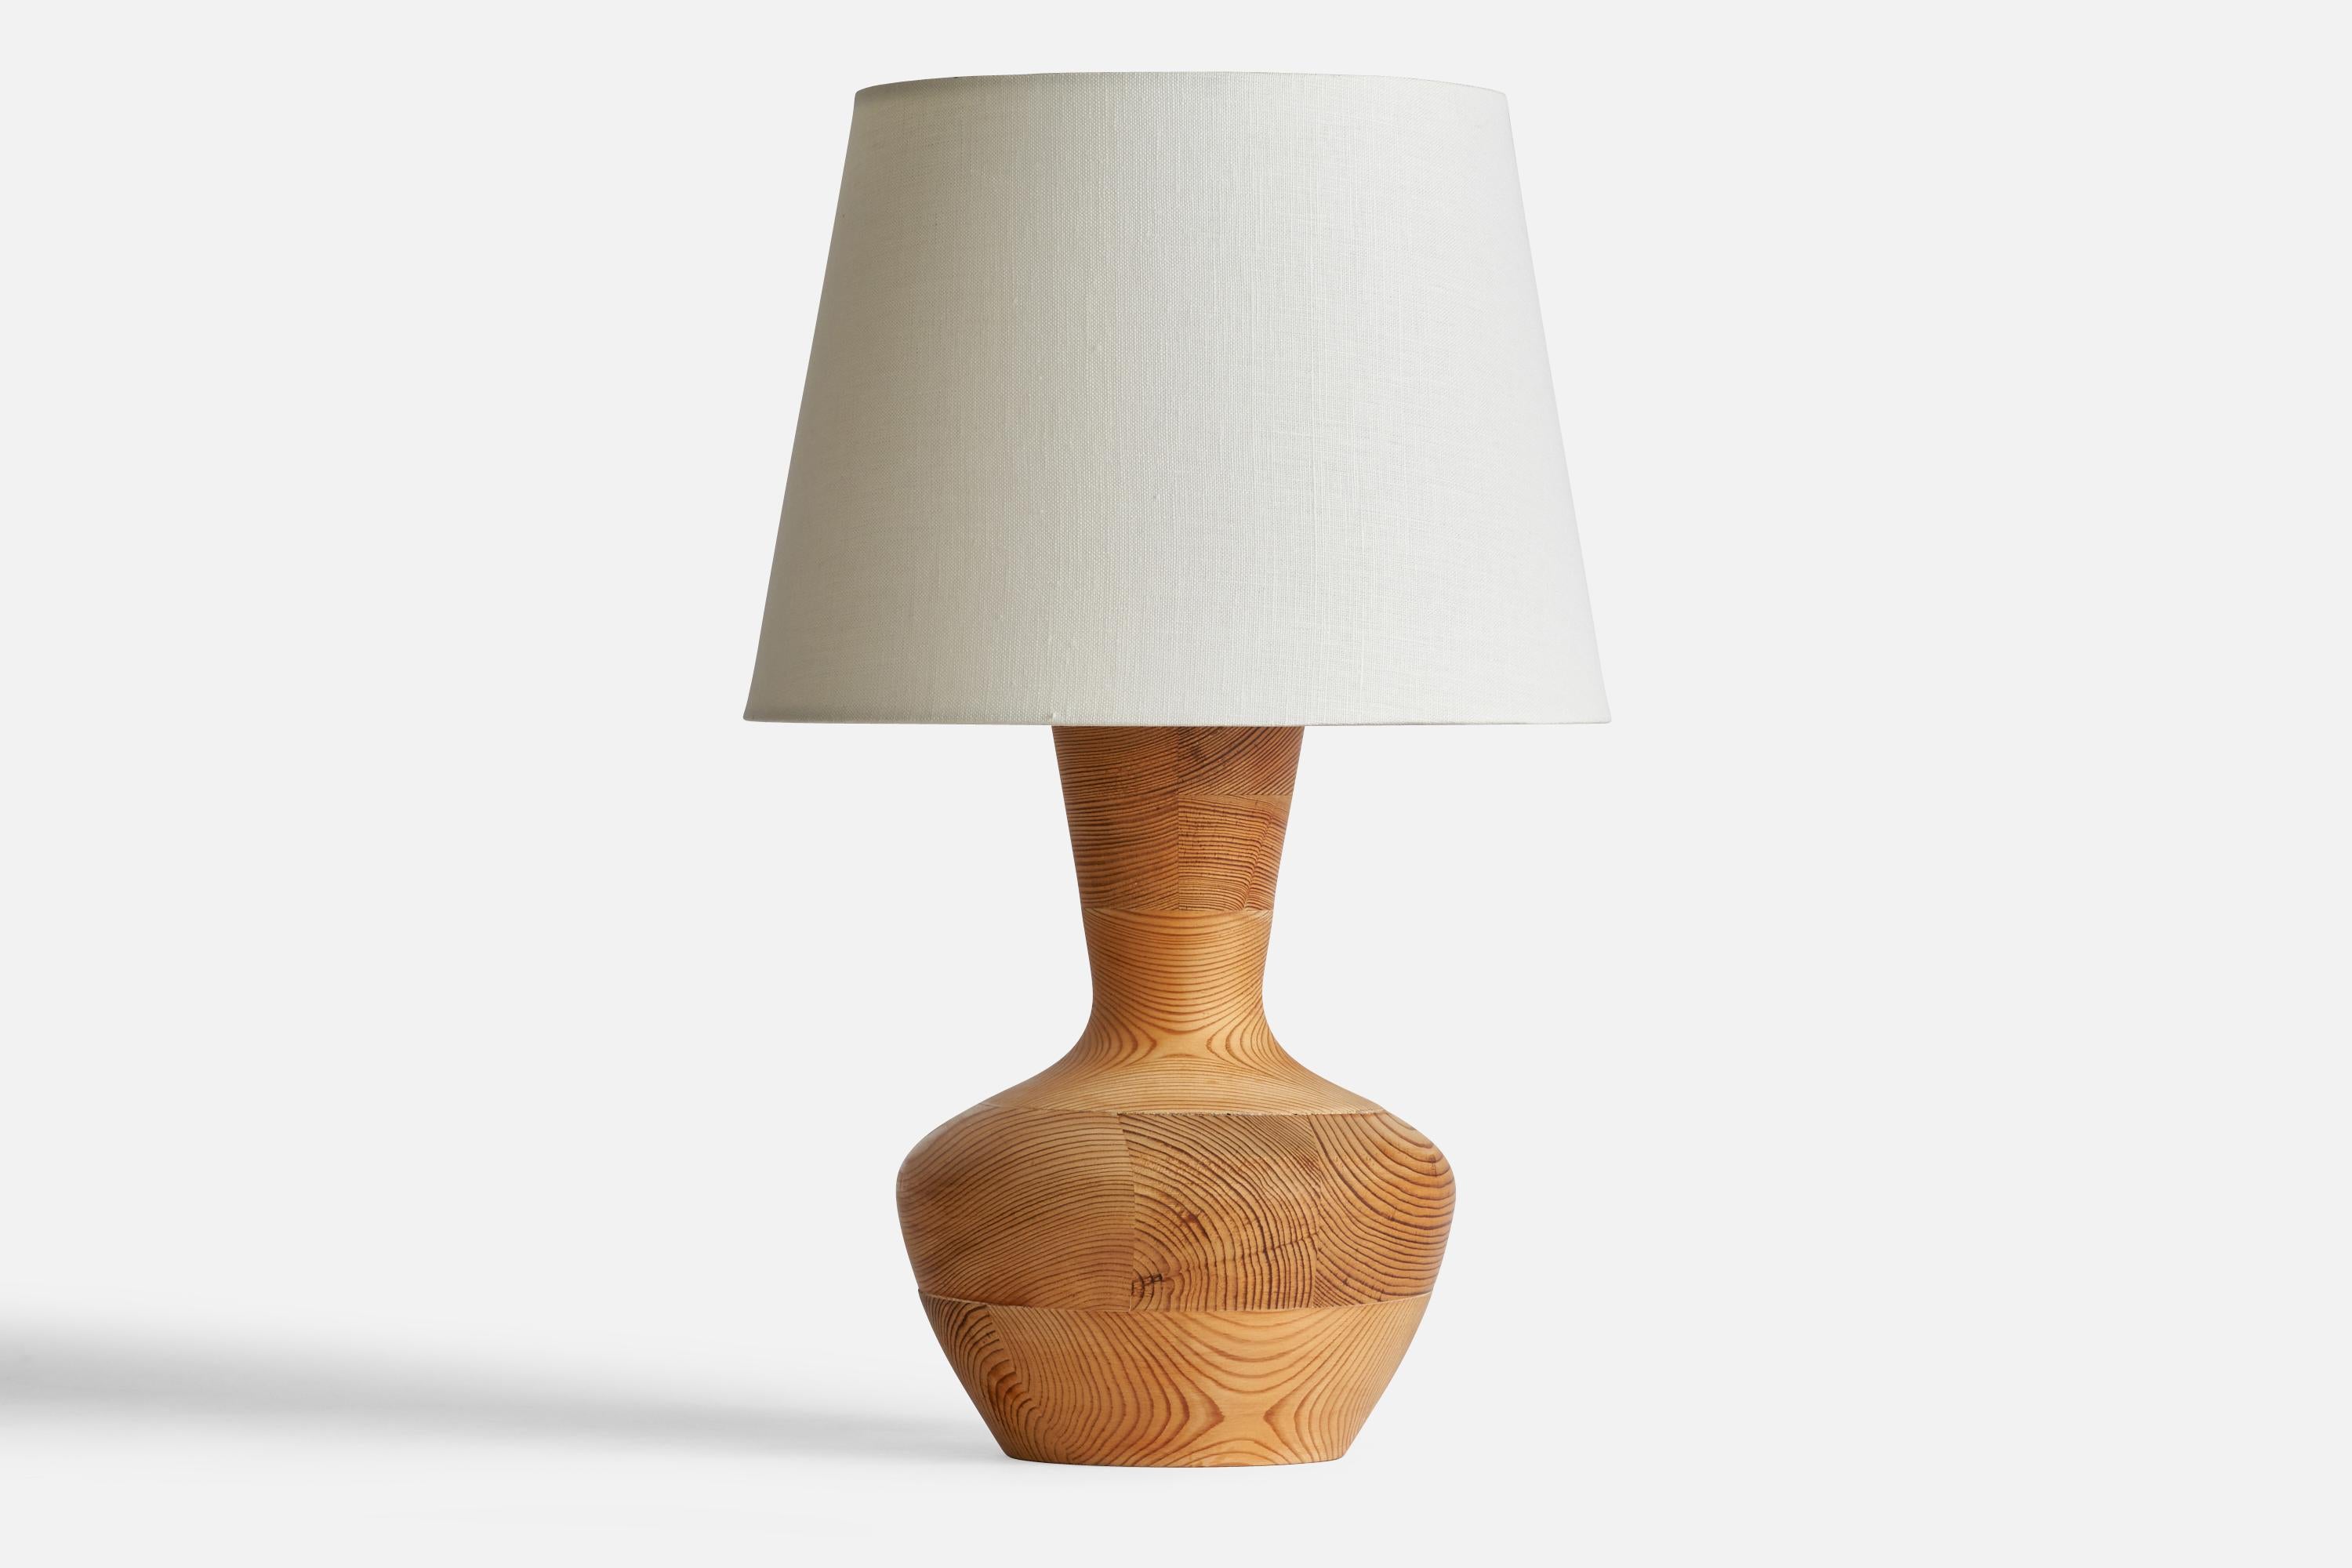 A turned pine table lamp designed and produced in Sweden, 1970s.

Dimensions of Lamp (inches): 113.5” H x 7.85” Diameter
Dimensions of Shade (inches): 9” Top Diameter x 12” Bottom Diameter x 9” H
Dimensions of Lamp with Shade (inches): 19.75” H x